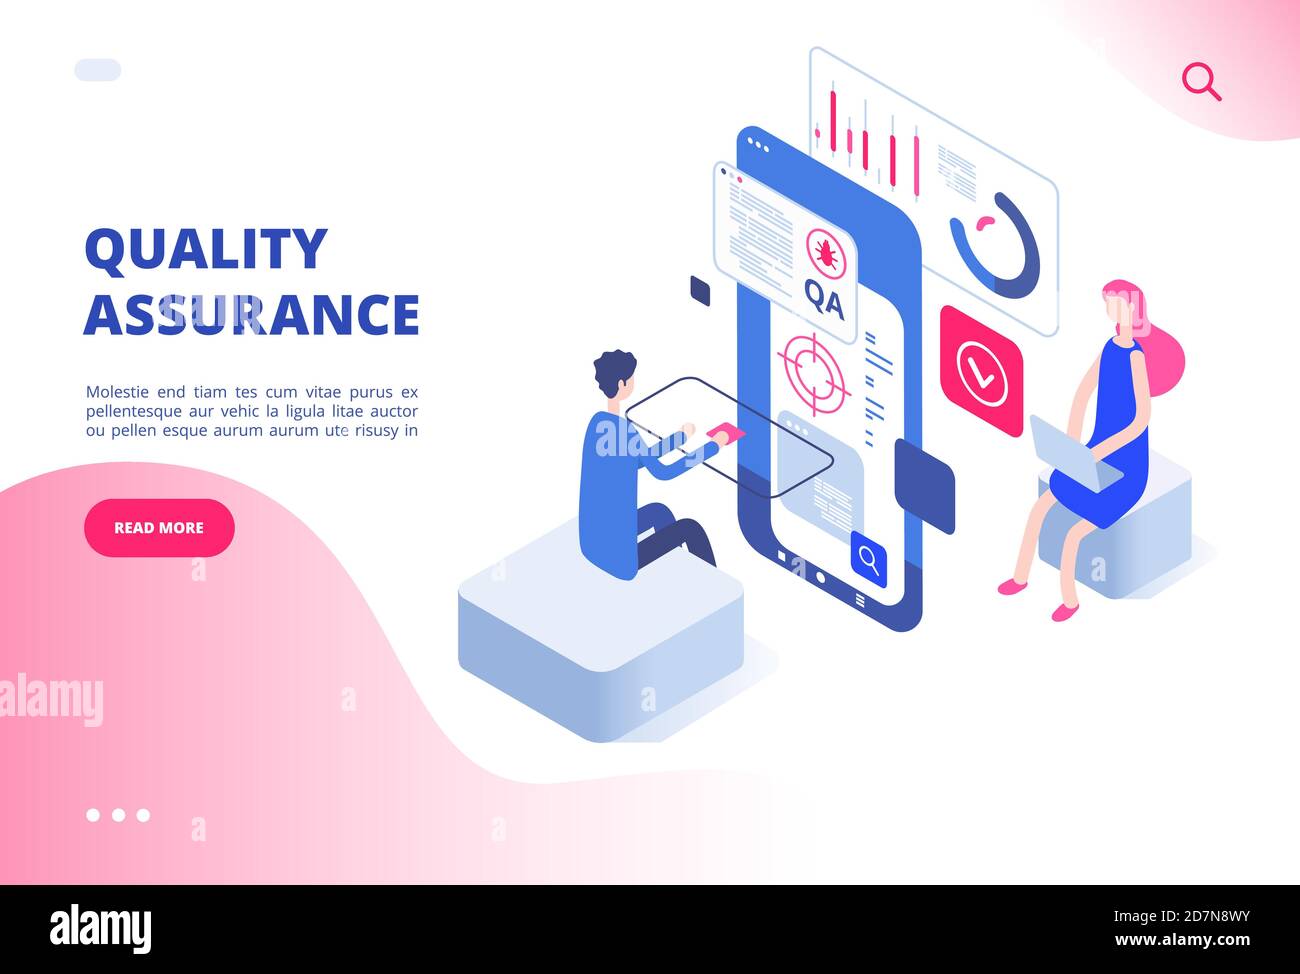 Quality assurance concept. Assured result productive decision analysis inspection software fixing bug system testing vector web page. Illustration of quality assurance control, satisfaction service Stock Vector